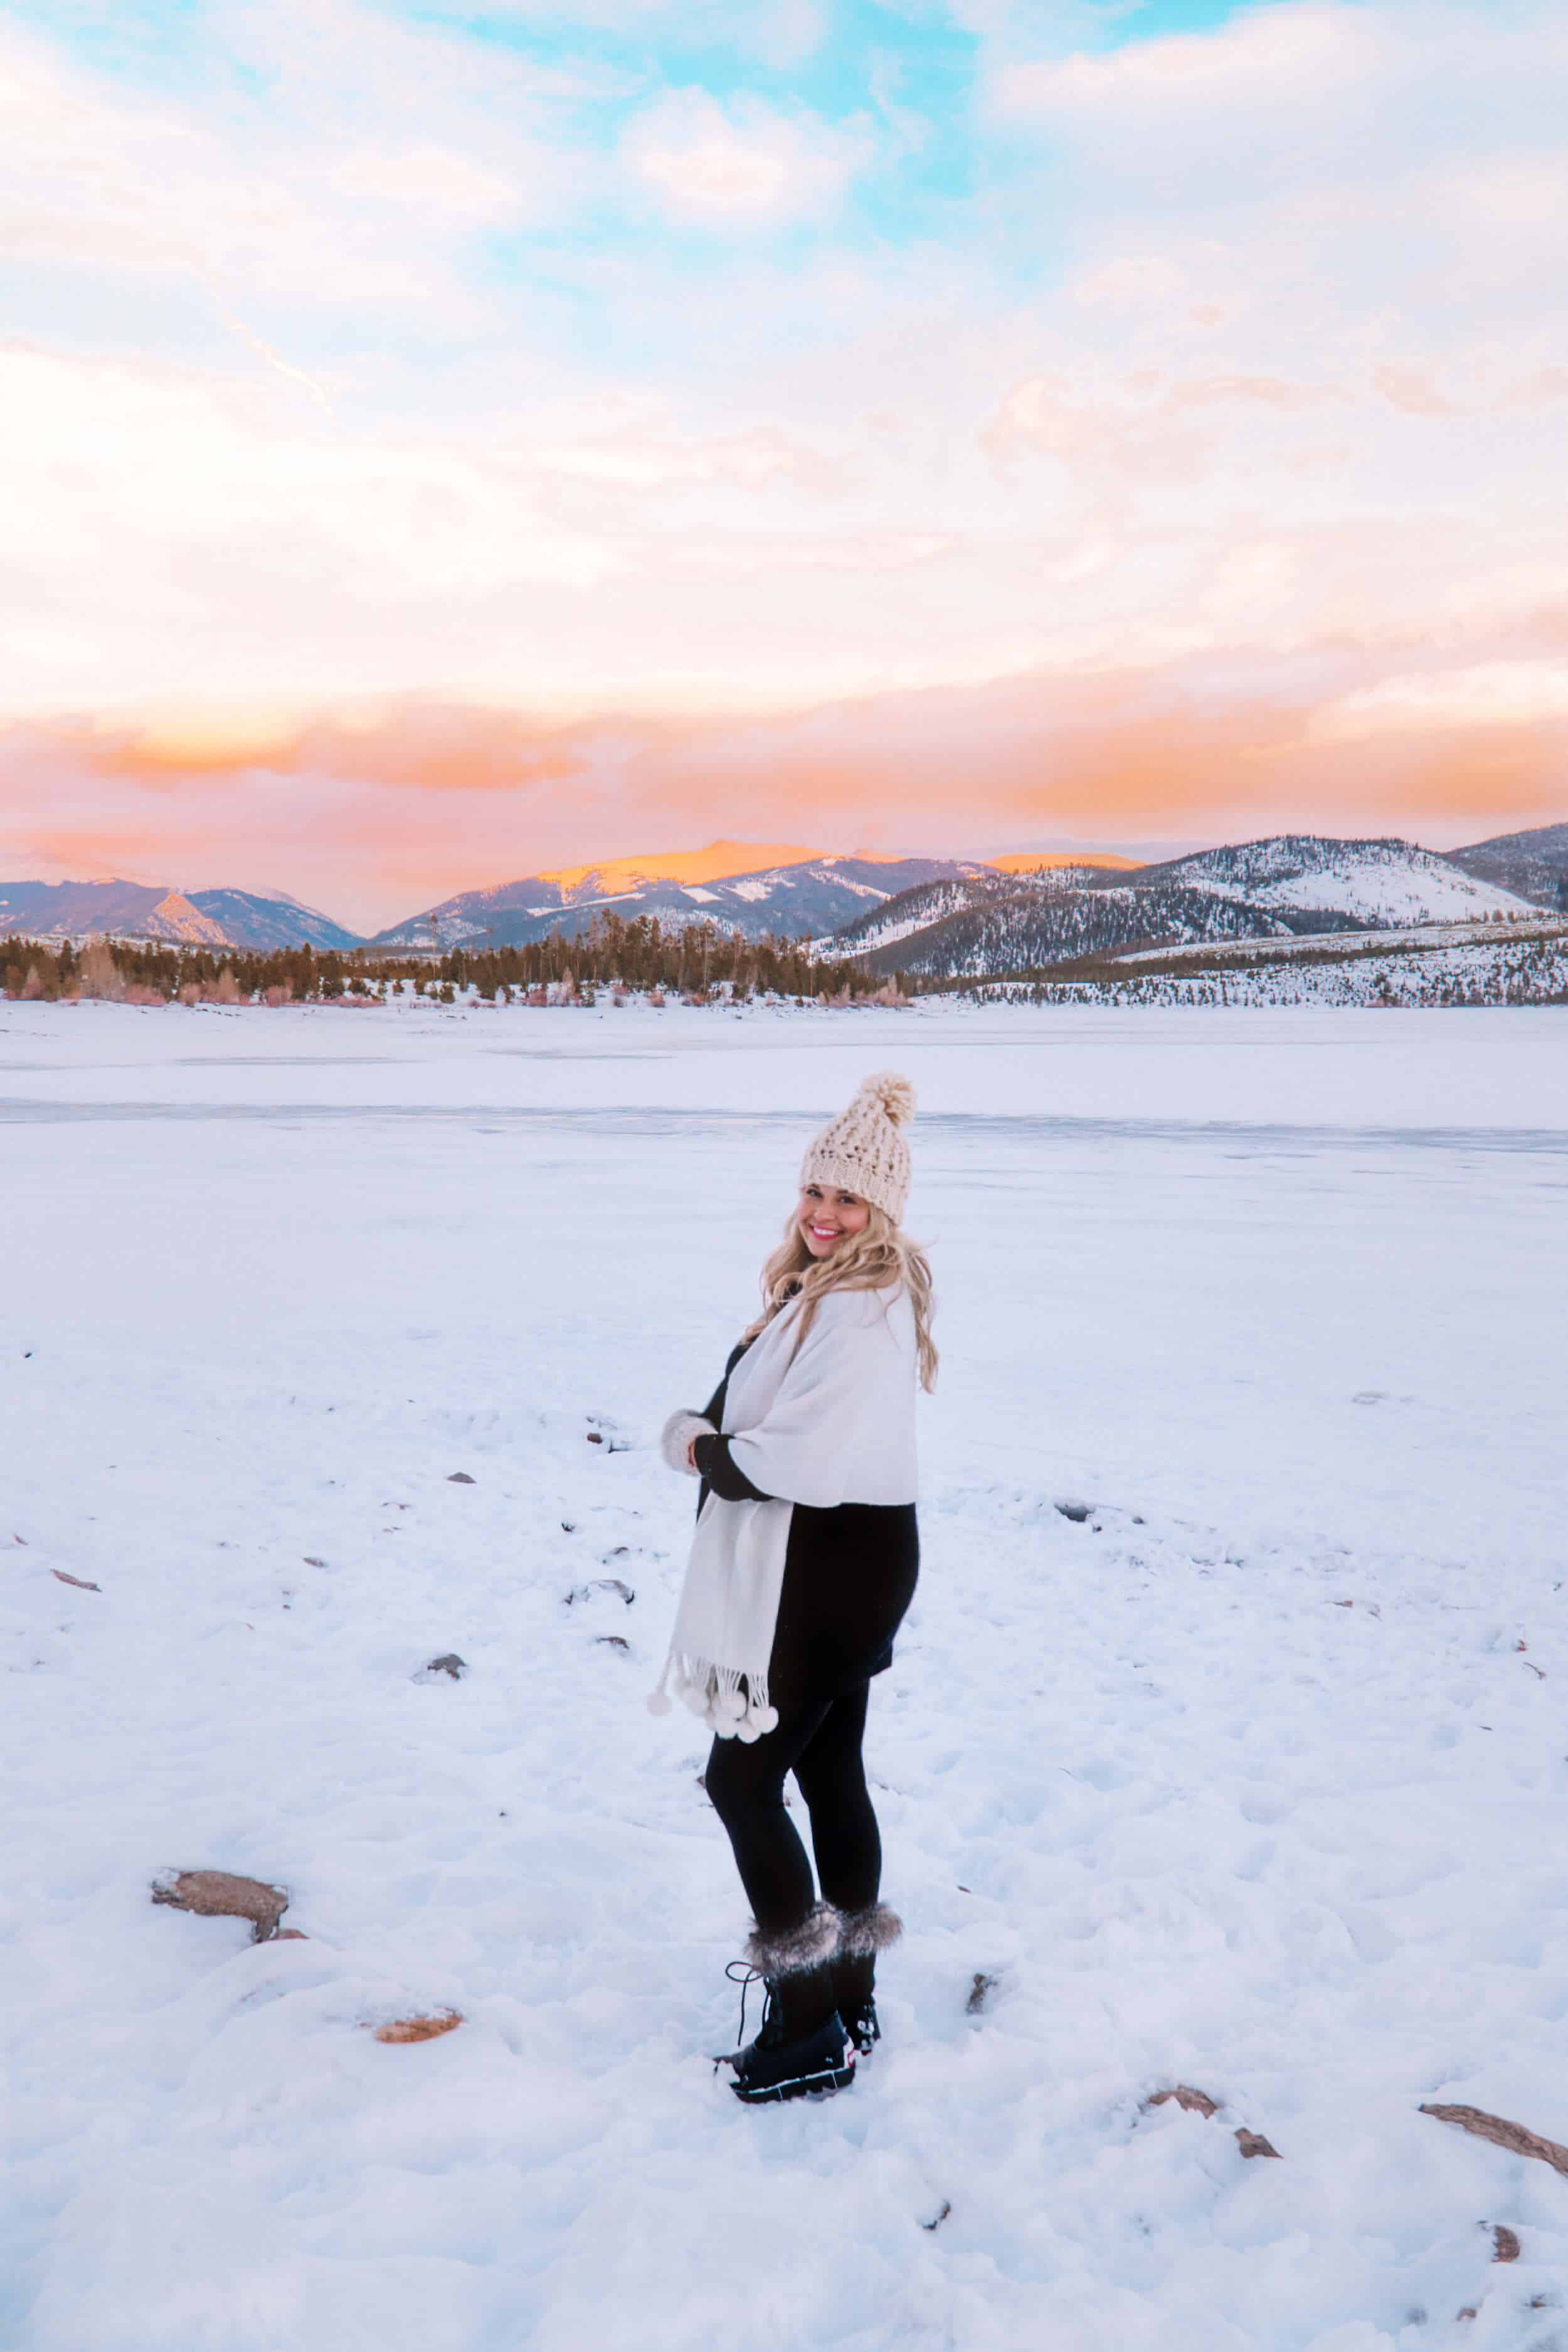 Sunset in Dillon | The Ultimate Guide to Vail, Colorado